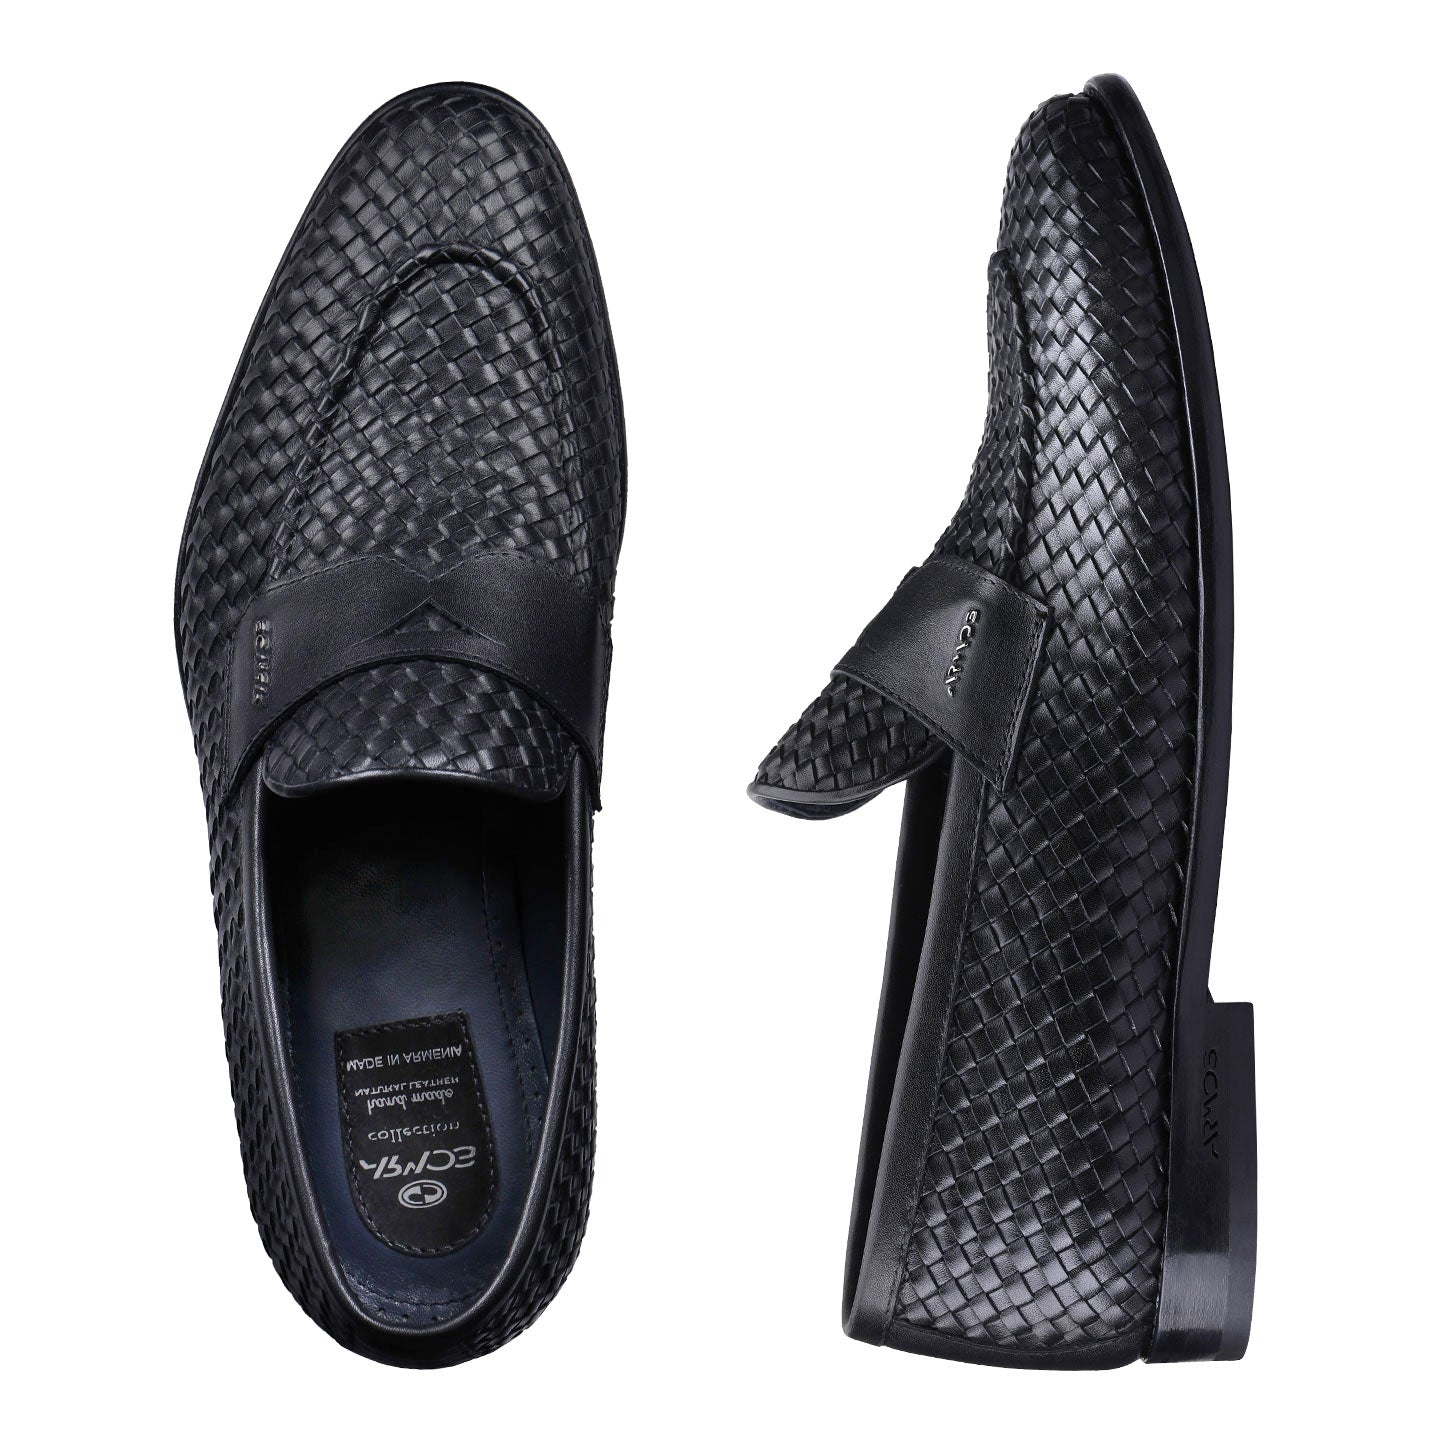 Woven penny loafers